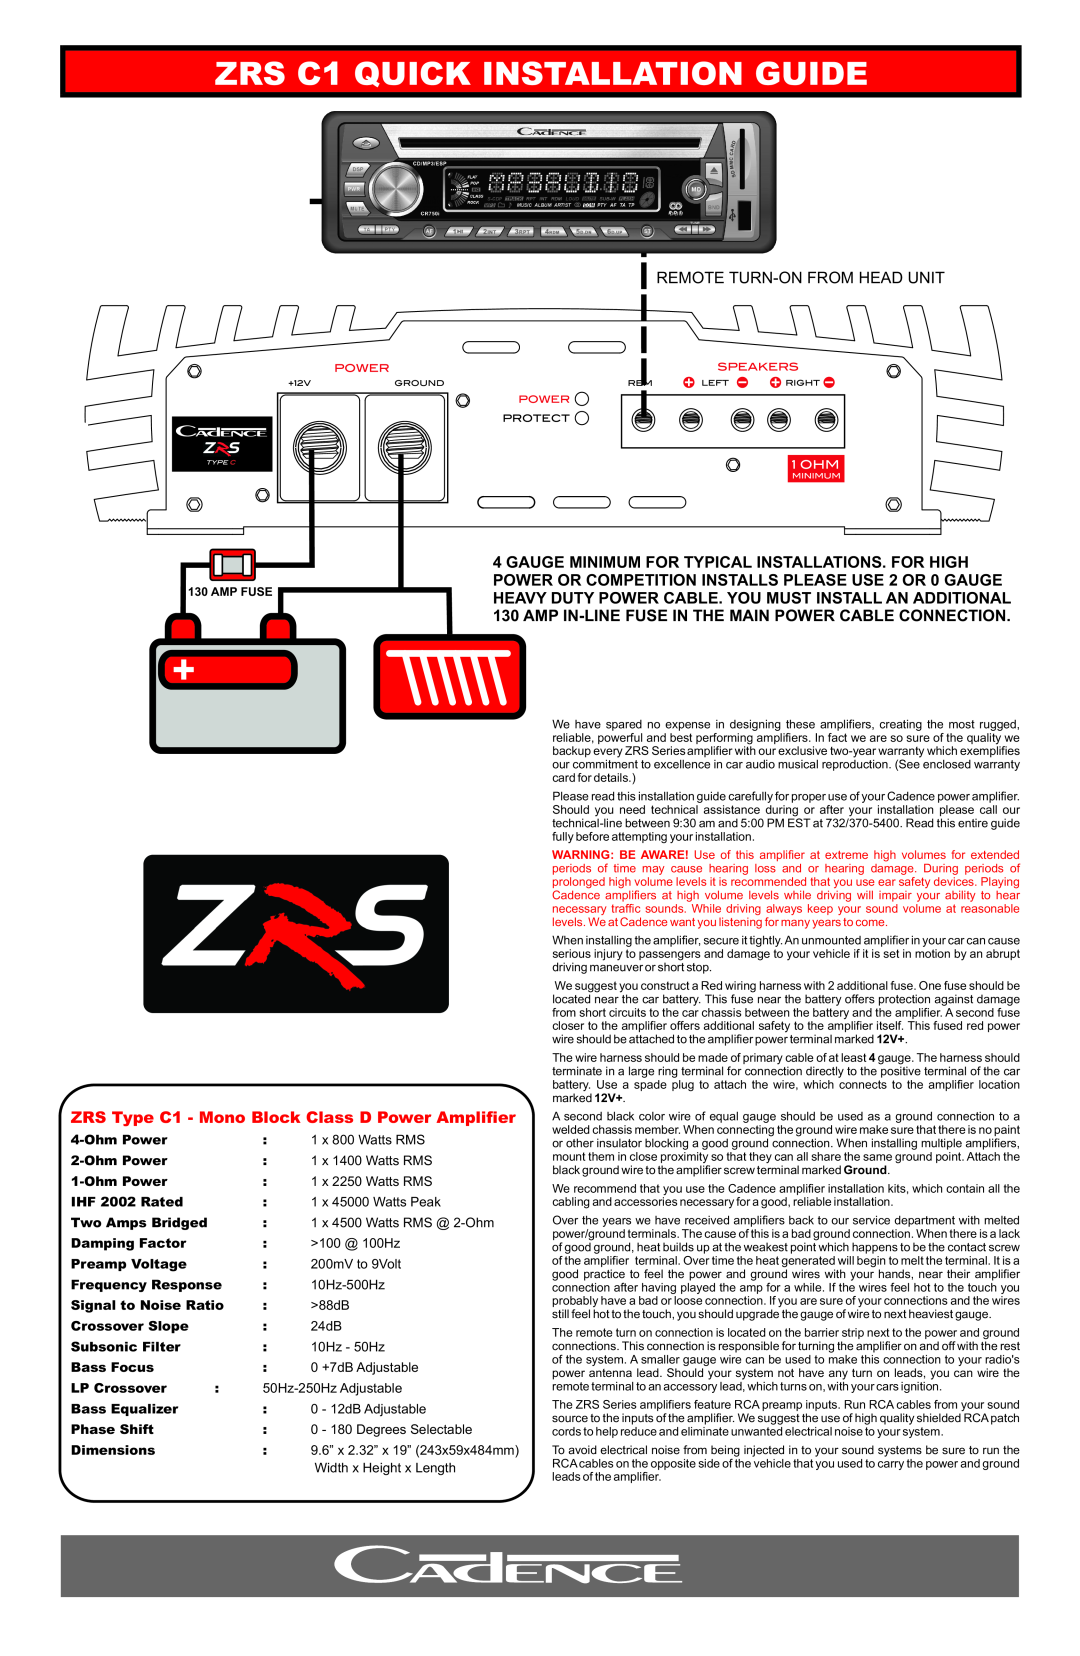 Cadence dimensions ZRS C1 QUICK INSTALLATION GUIDE, Remote Turn-On From Head Unit 